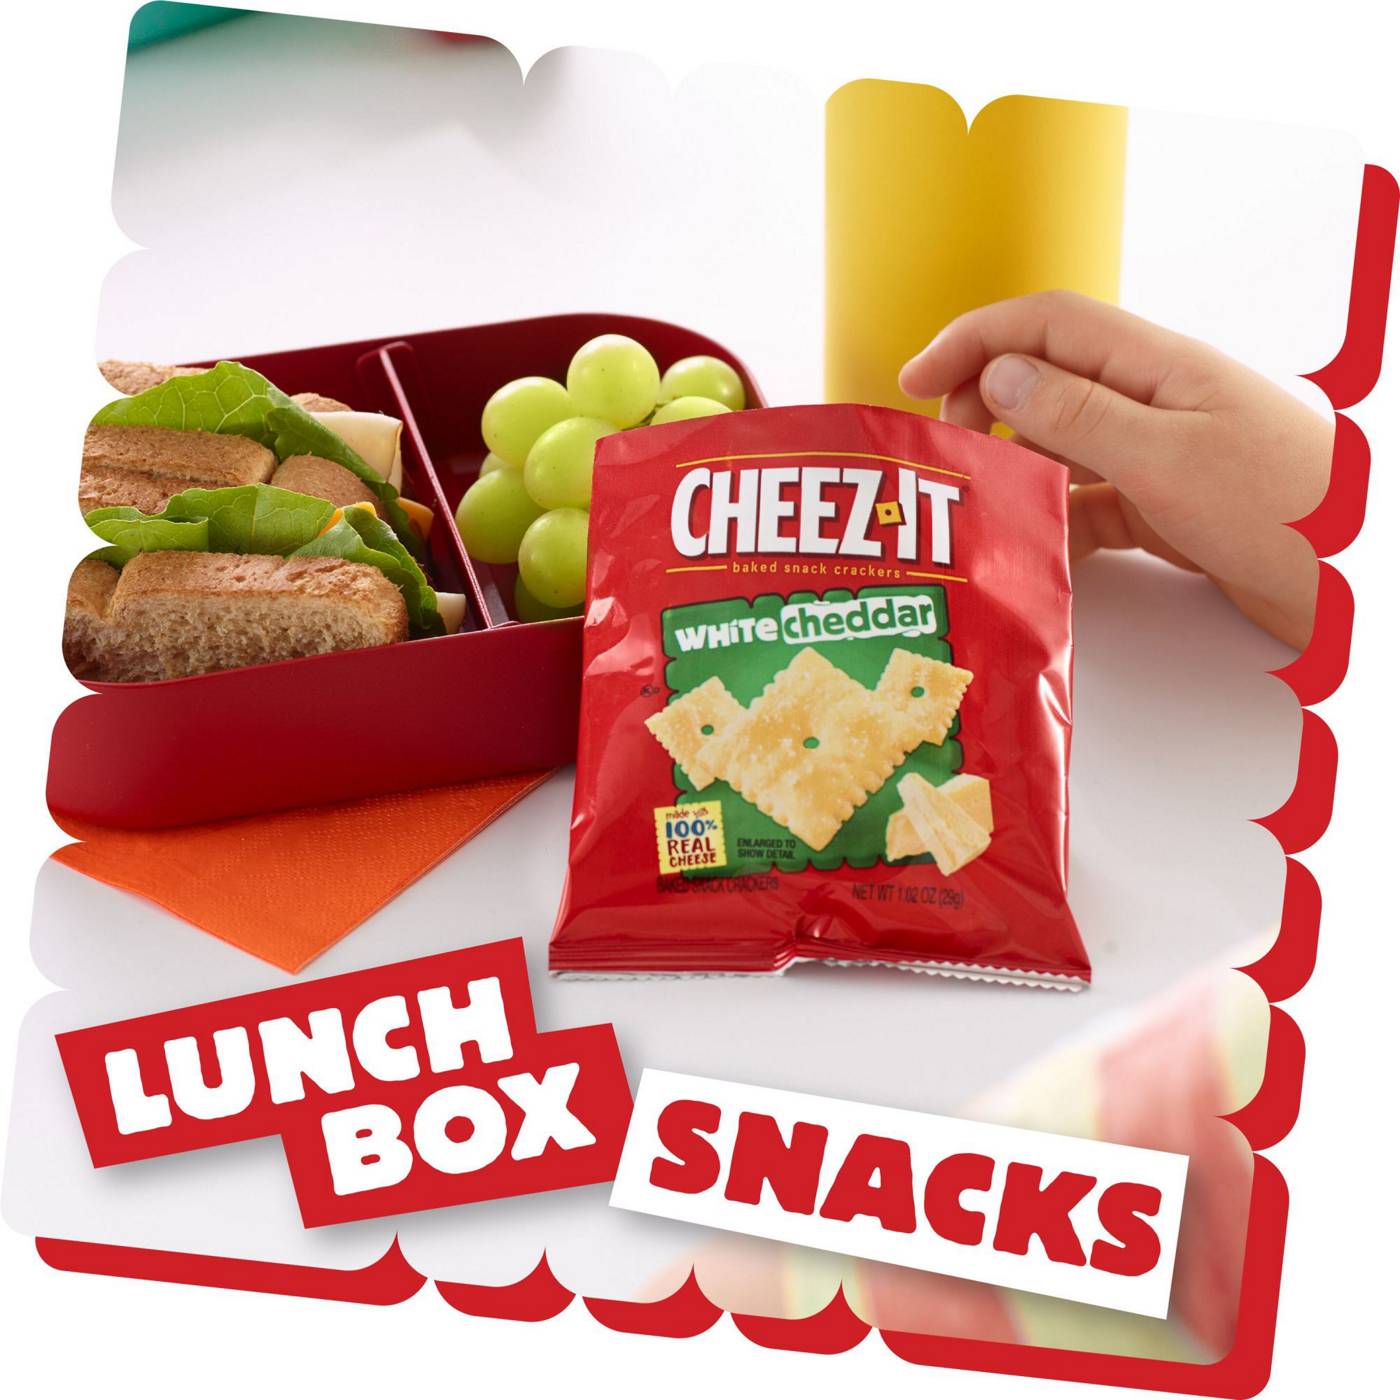 Cheez-It White Cheddar Baked Snack Crackers, 12.24 oz; image 3 of 5